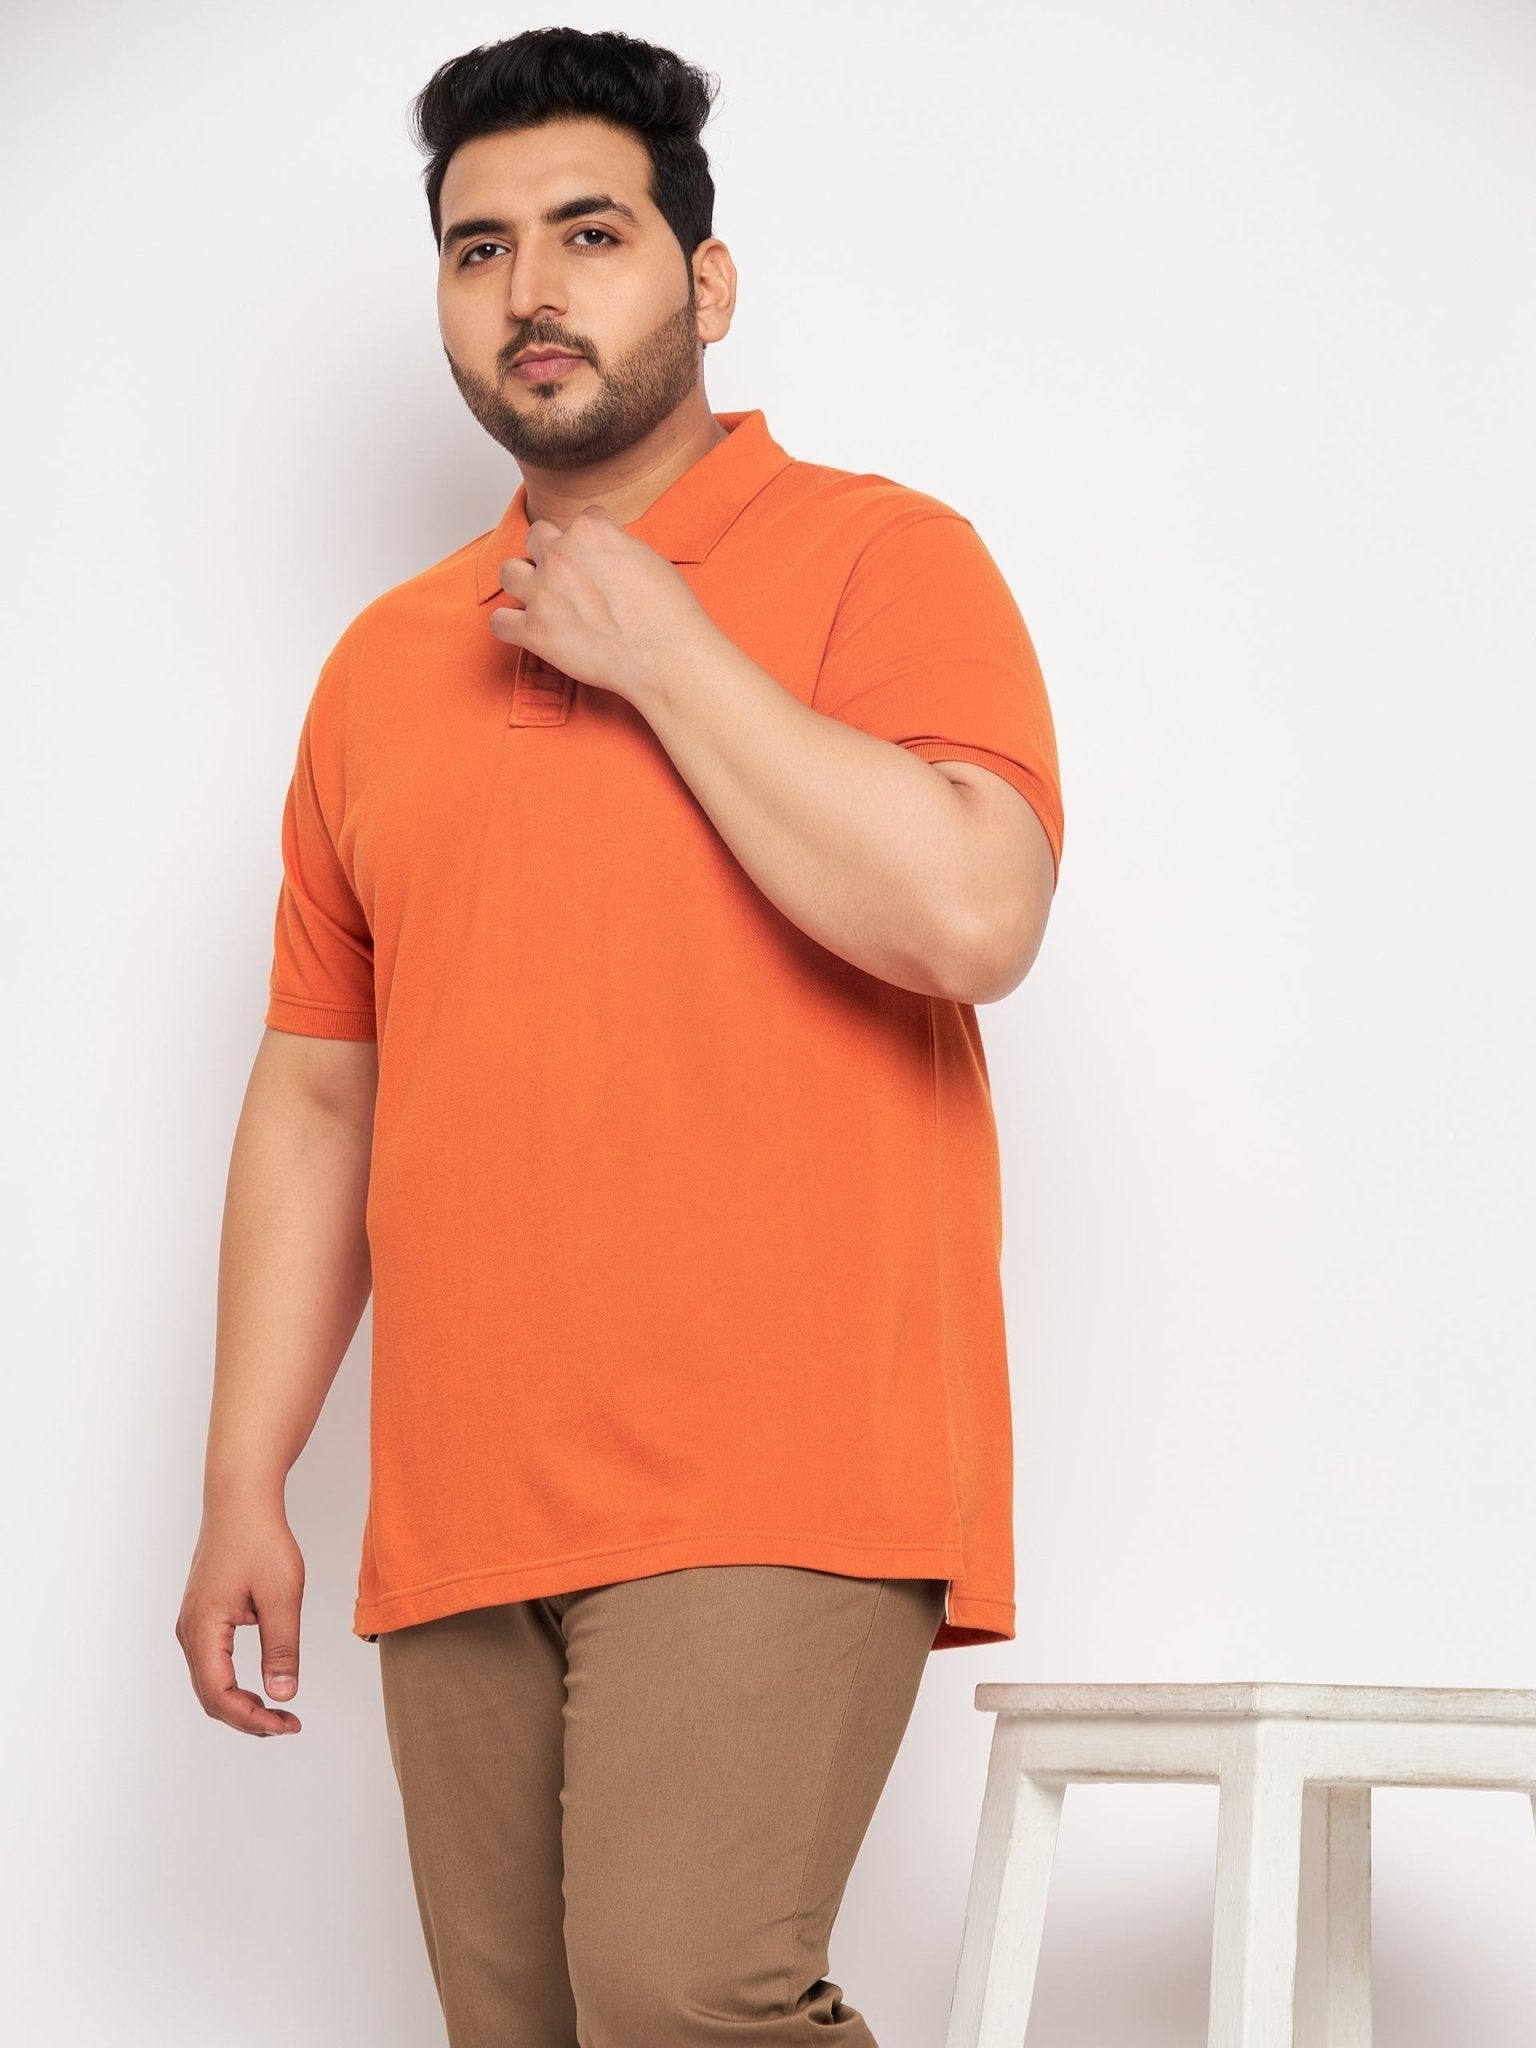 Plus size Red Polo T-Shirt